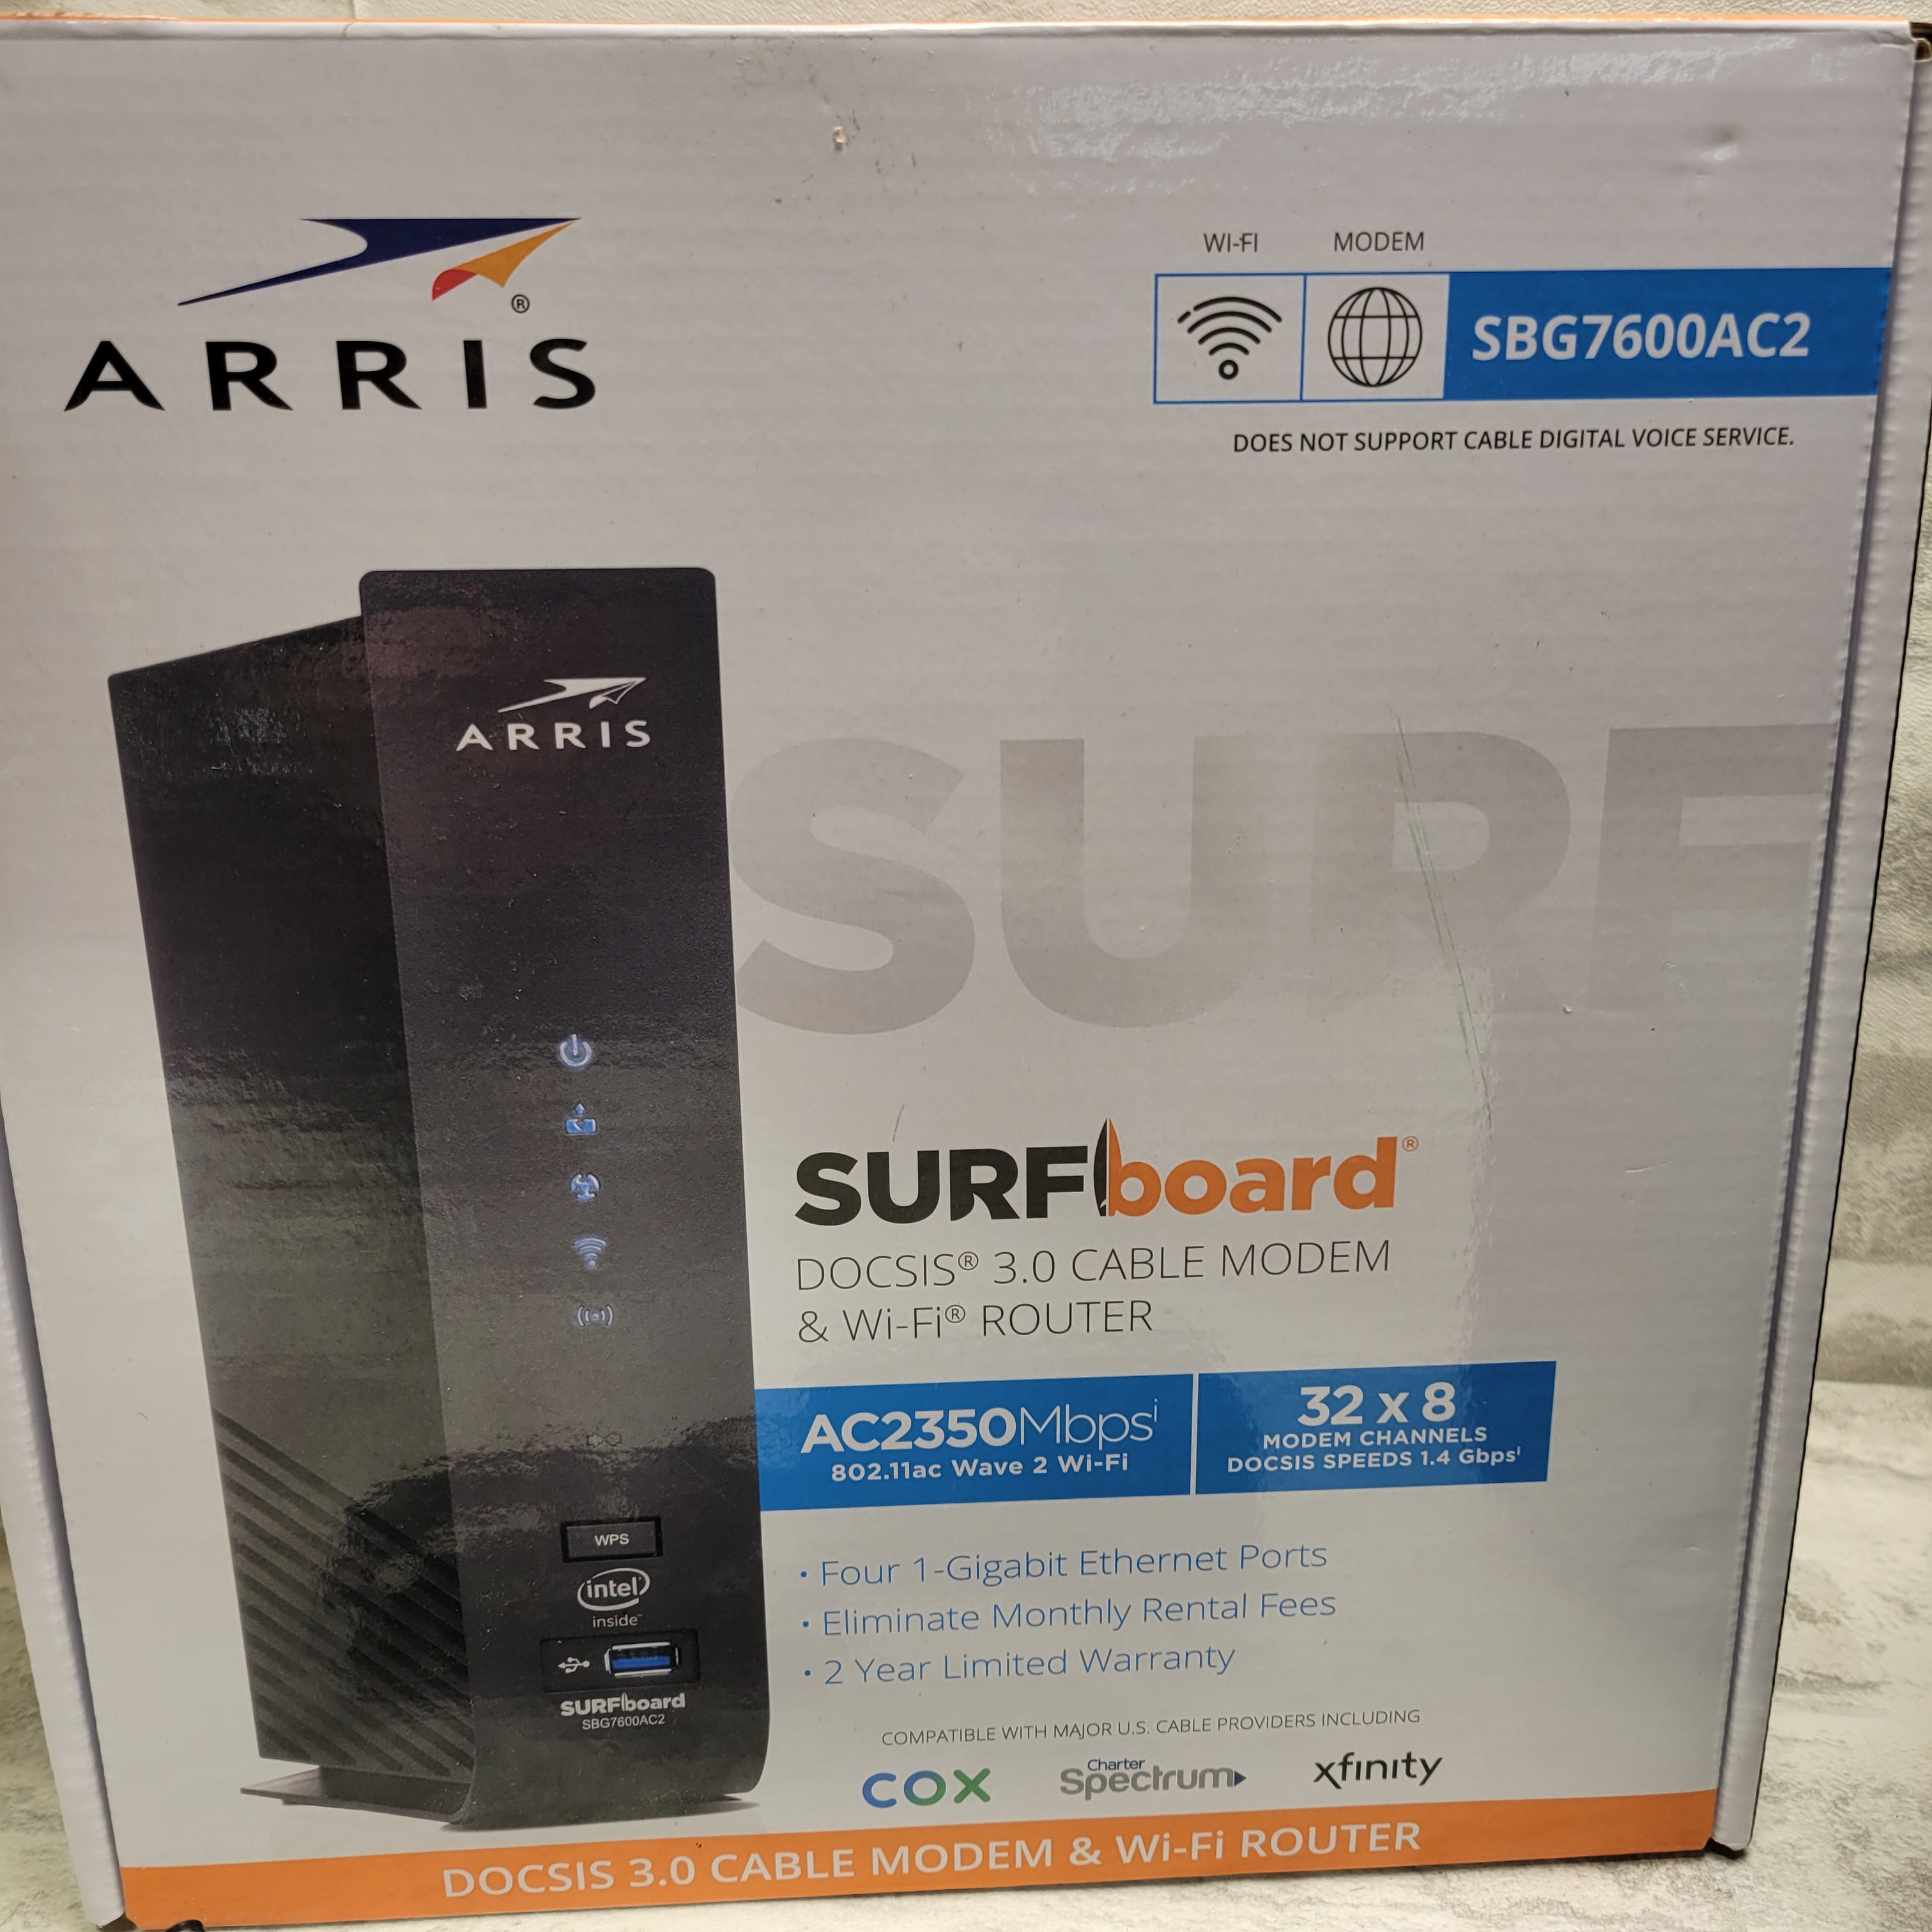 ARRIS SURFboard SBG7600AC2 DOCSIS 3.0 Cable Modem & AC2350 Wi-Fi Router (7609151095022)